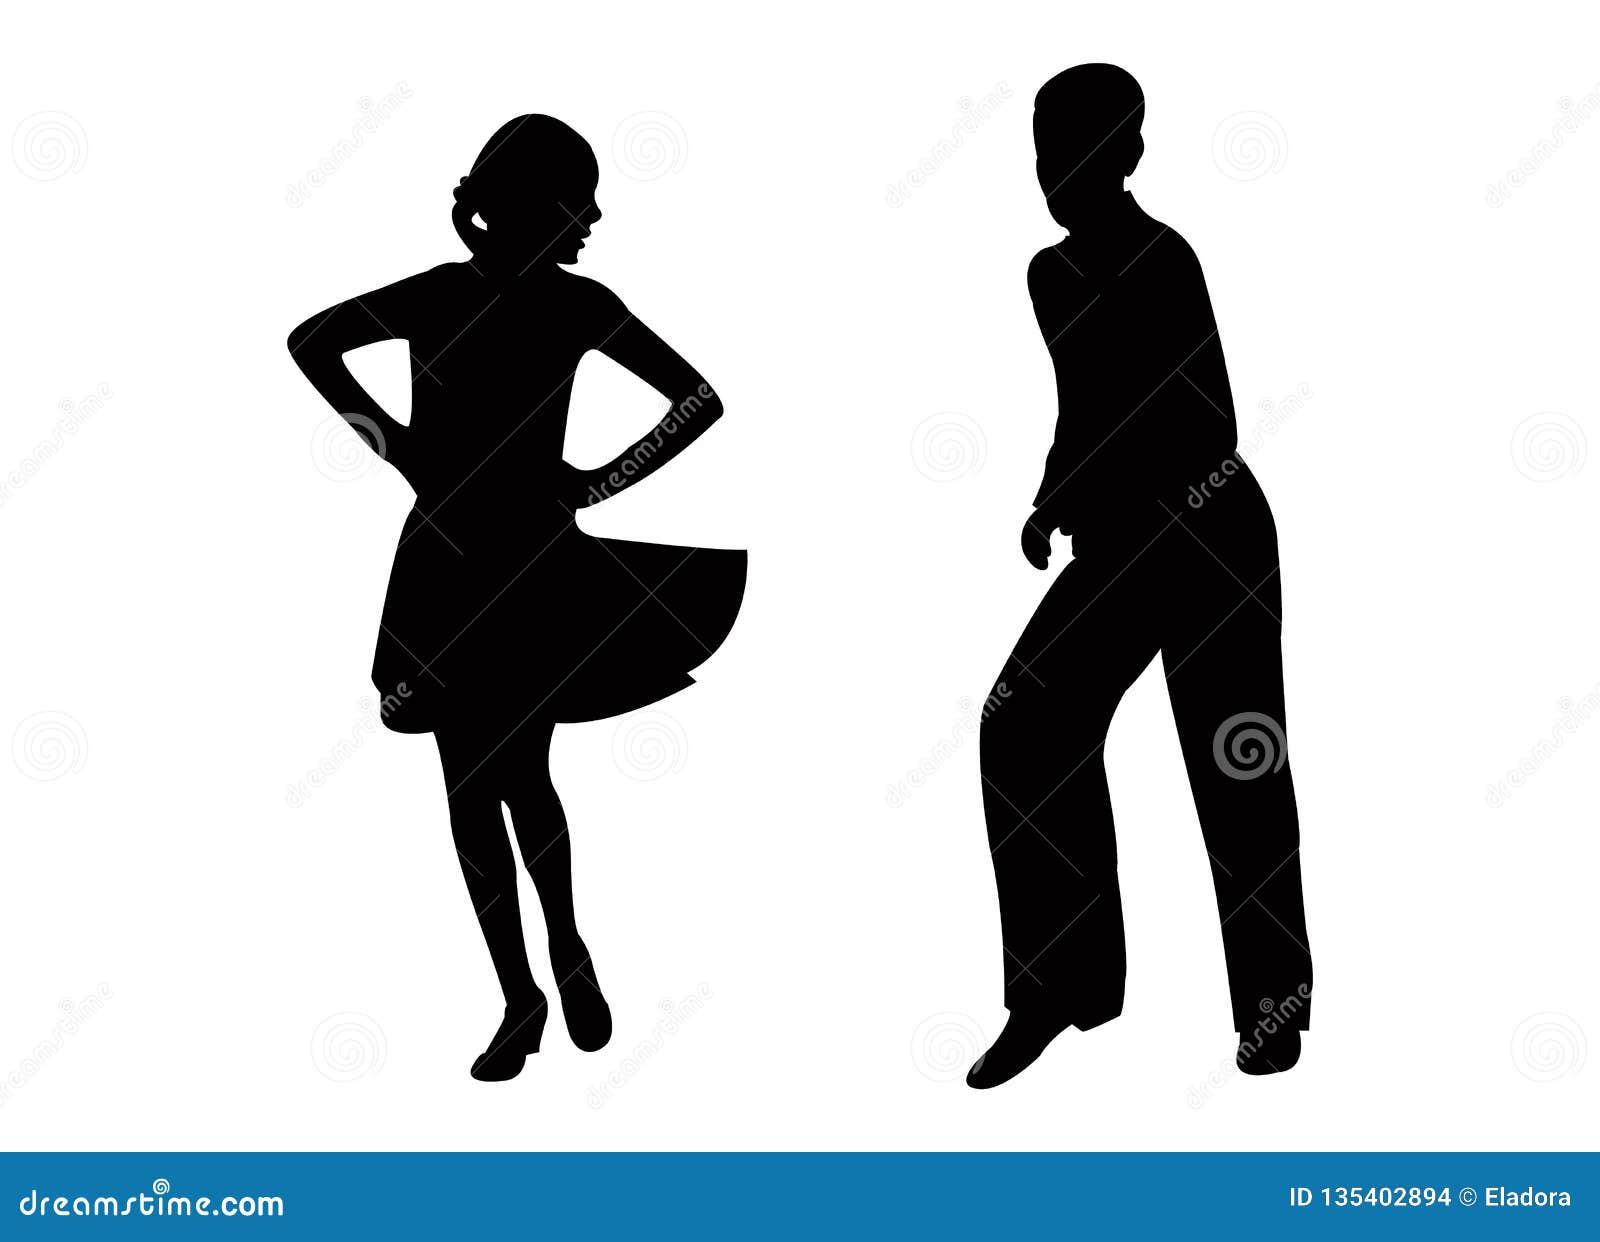 A Teenager Couple Dancing Silhouette Vector Stock Vector Illustration Of White Couple 135402894 Free sketch vector personal use. https www dreamstime com teenager couple dancing body black color silhouette vector art work teenager couple dancing silhouette vector image135402894